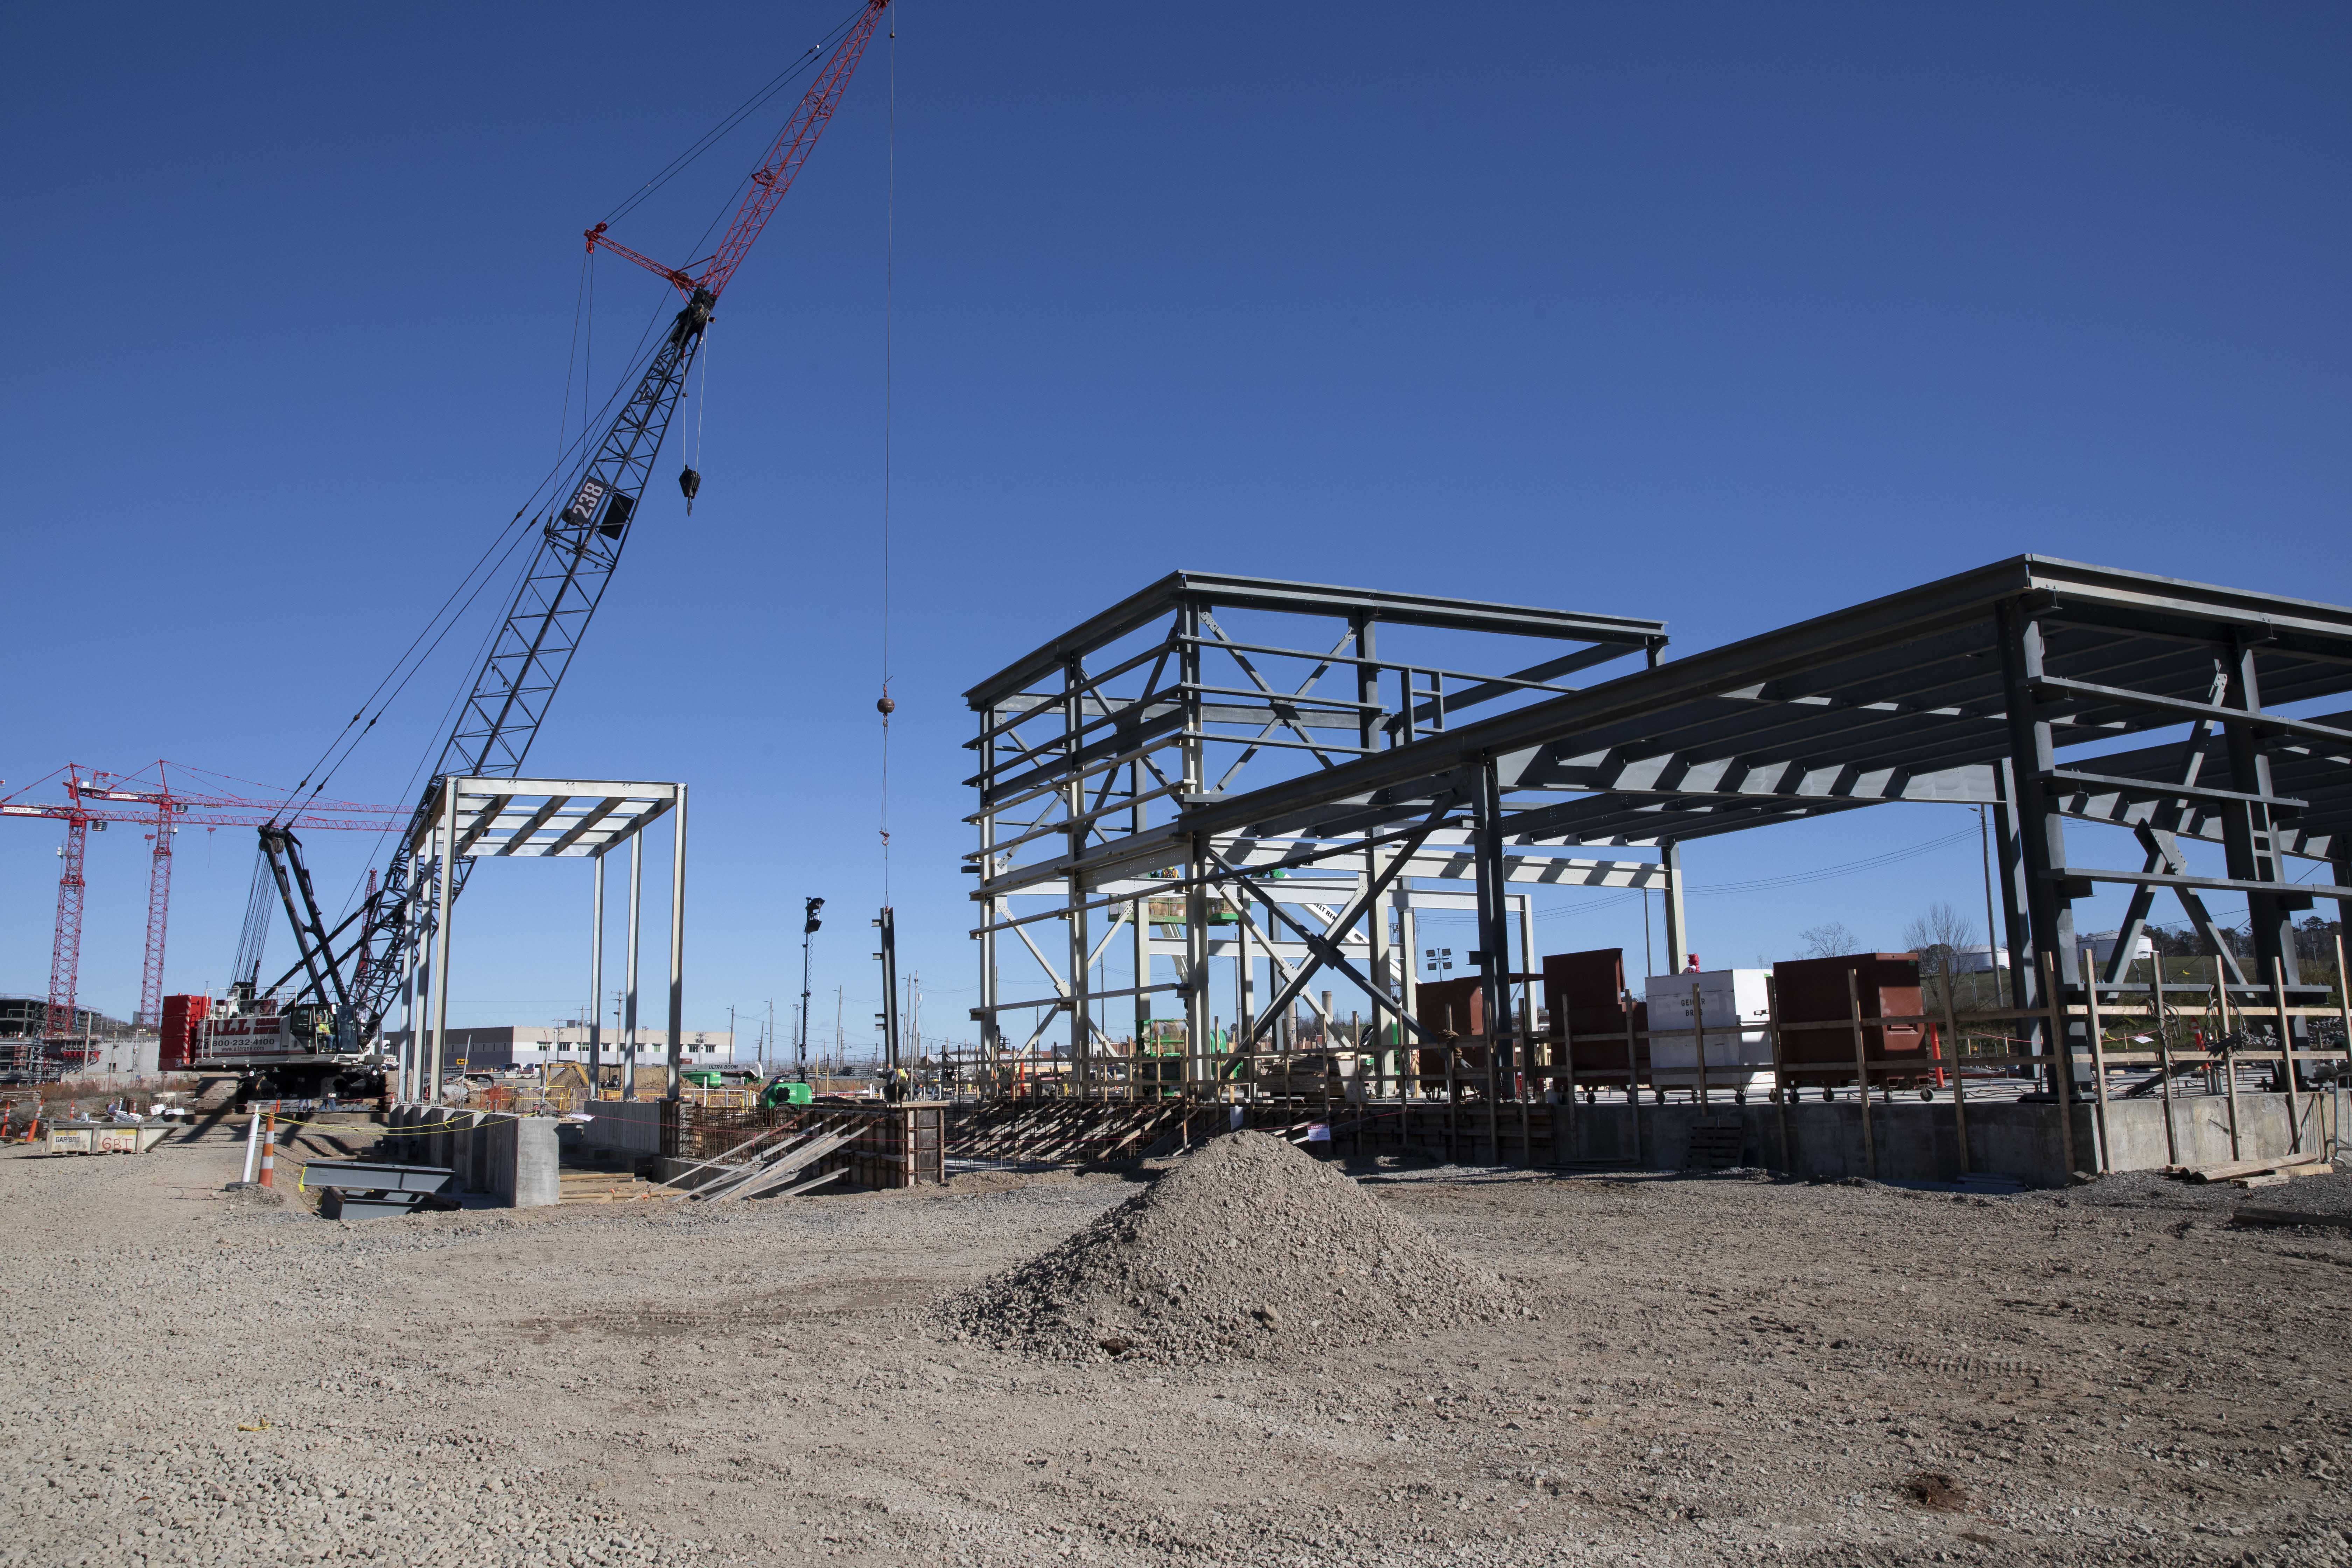 Installation of structural steel began at the Process Support Facilities in October 2020 and is forecast to complete in March 2021.